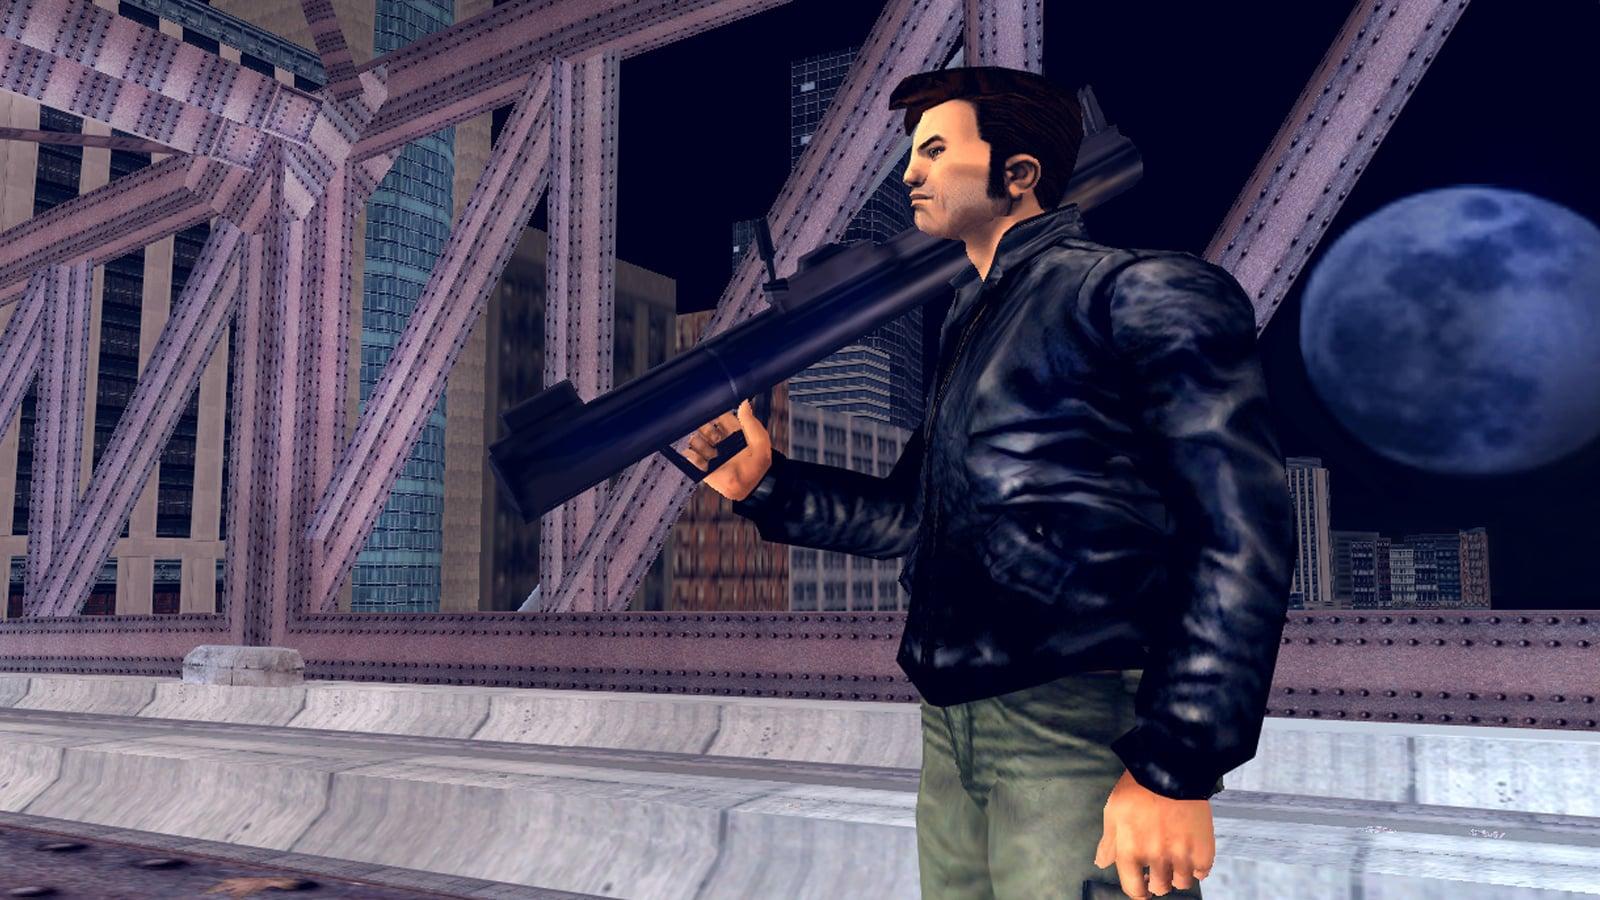 GTA 3 Cheats for PlayStation, Xbox, Switch, PC and Mobile